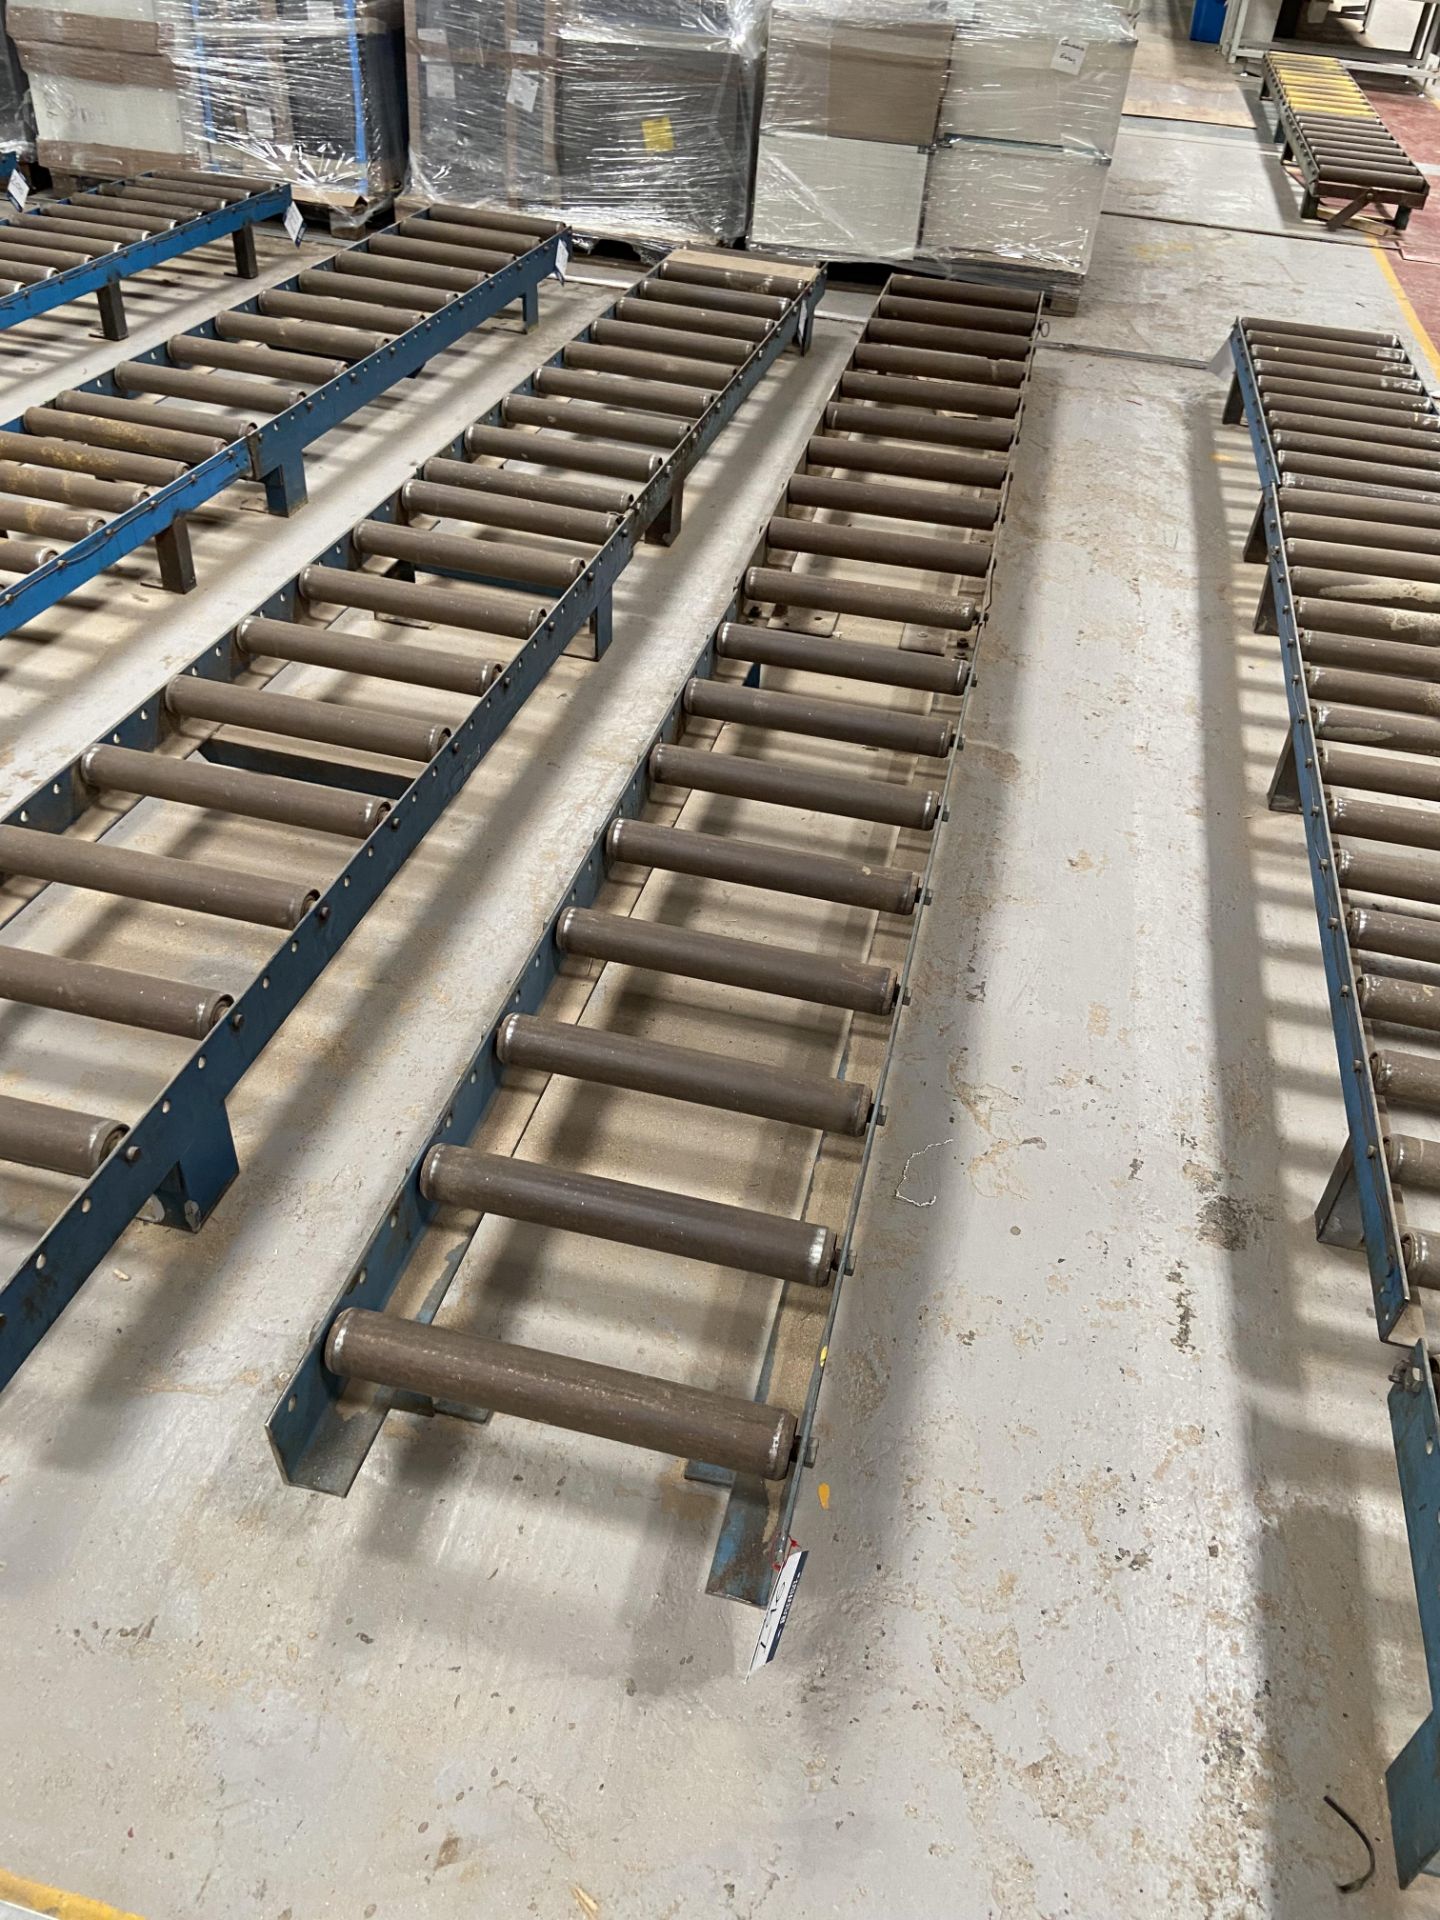 2 Section gravity roller conveyoring, total width 490mm, total length 4400mm, height 240mm with